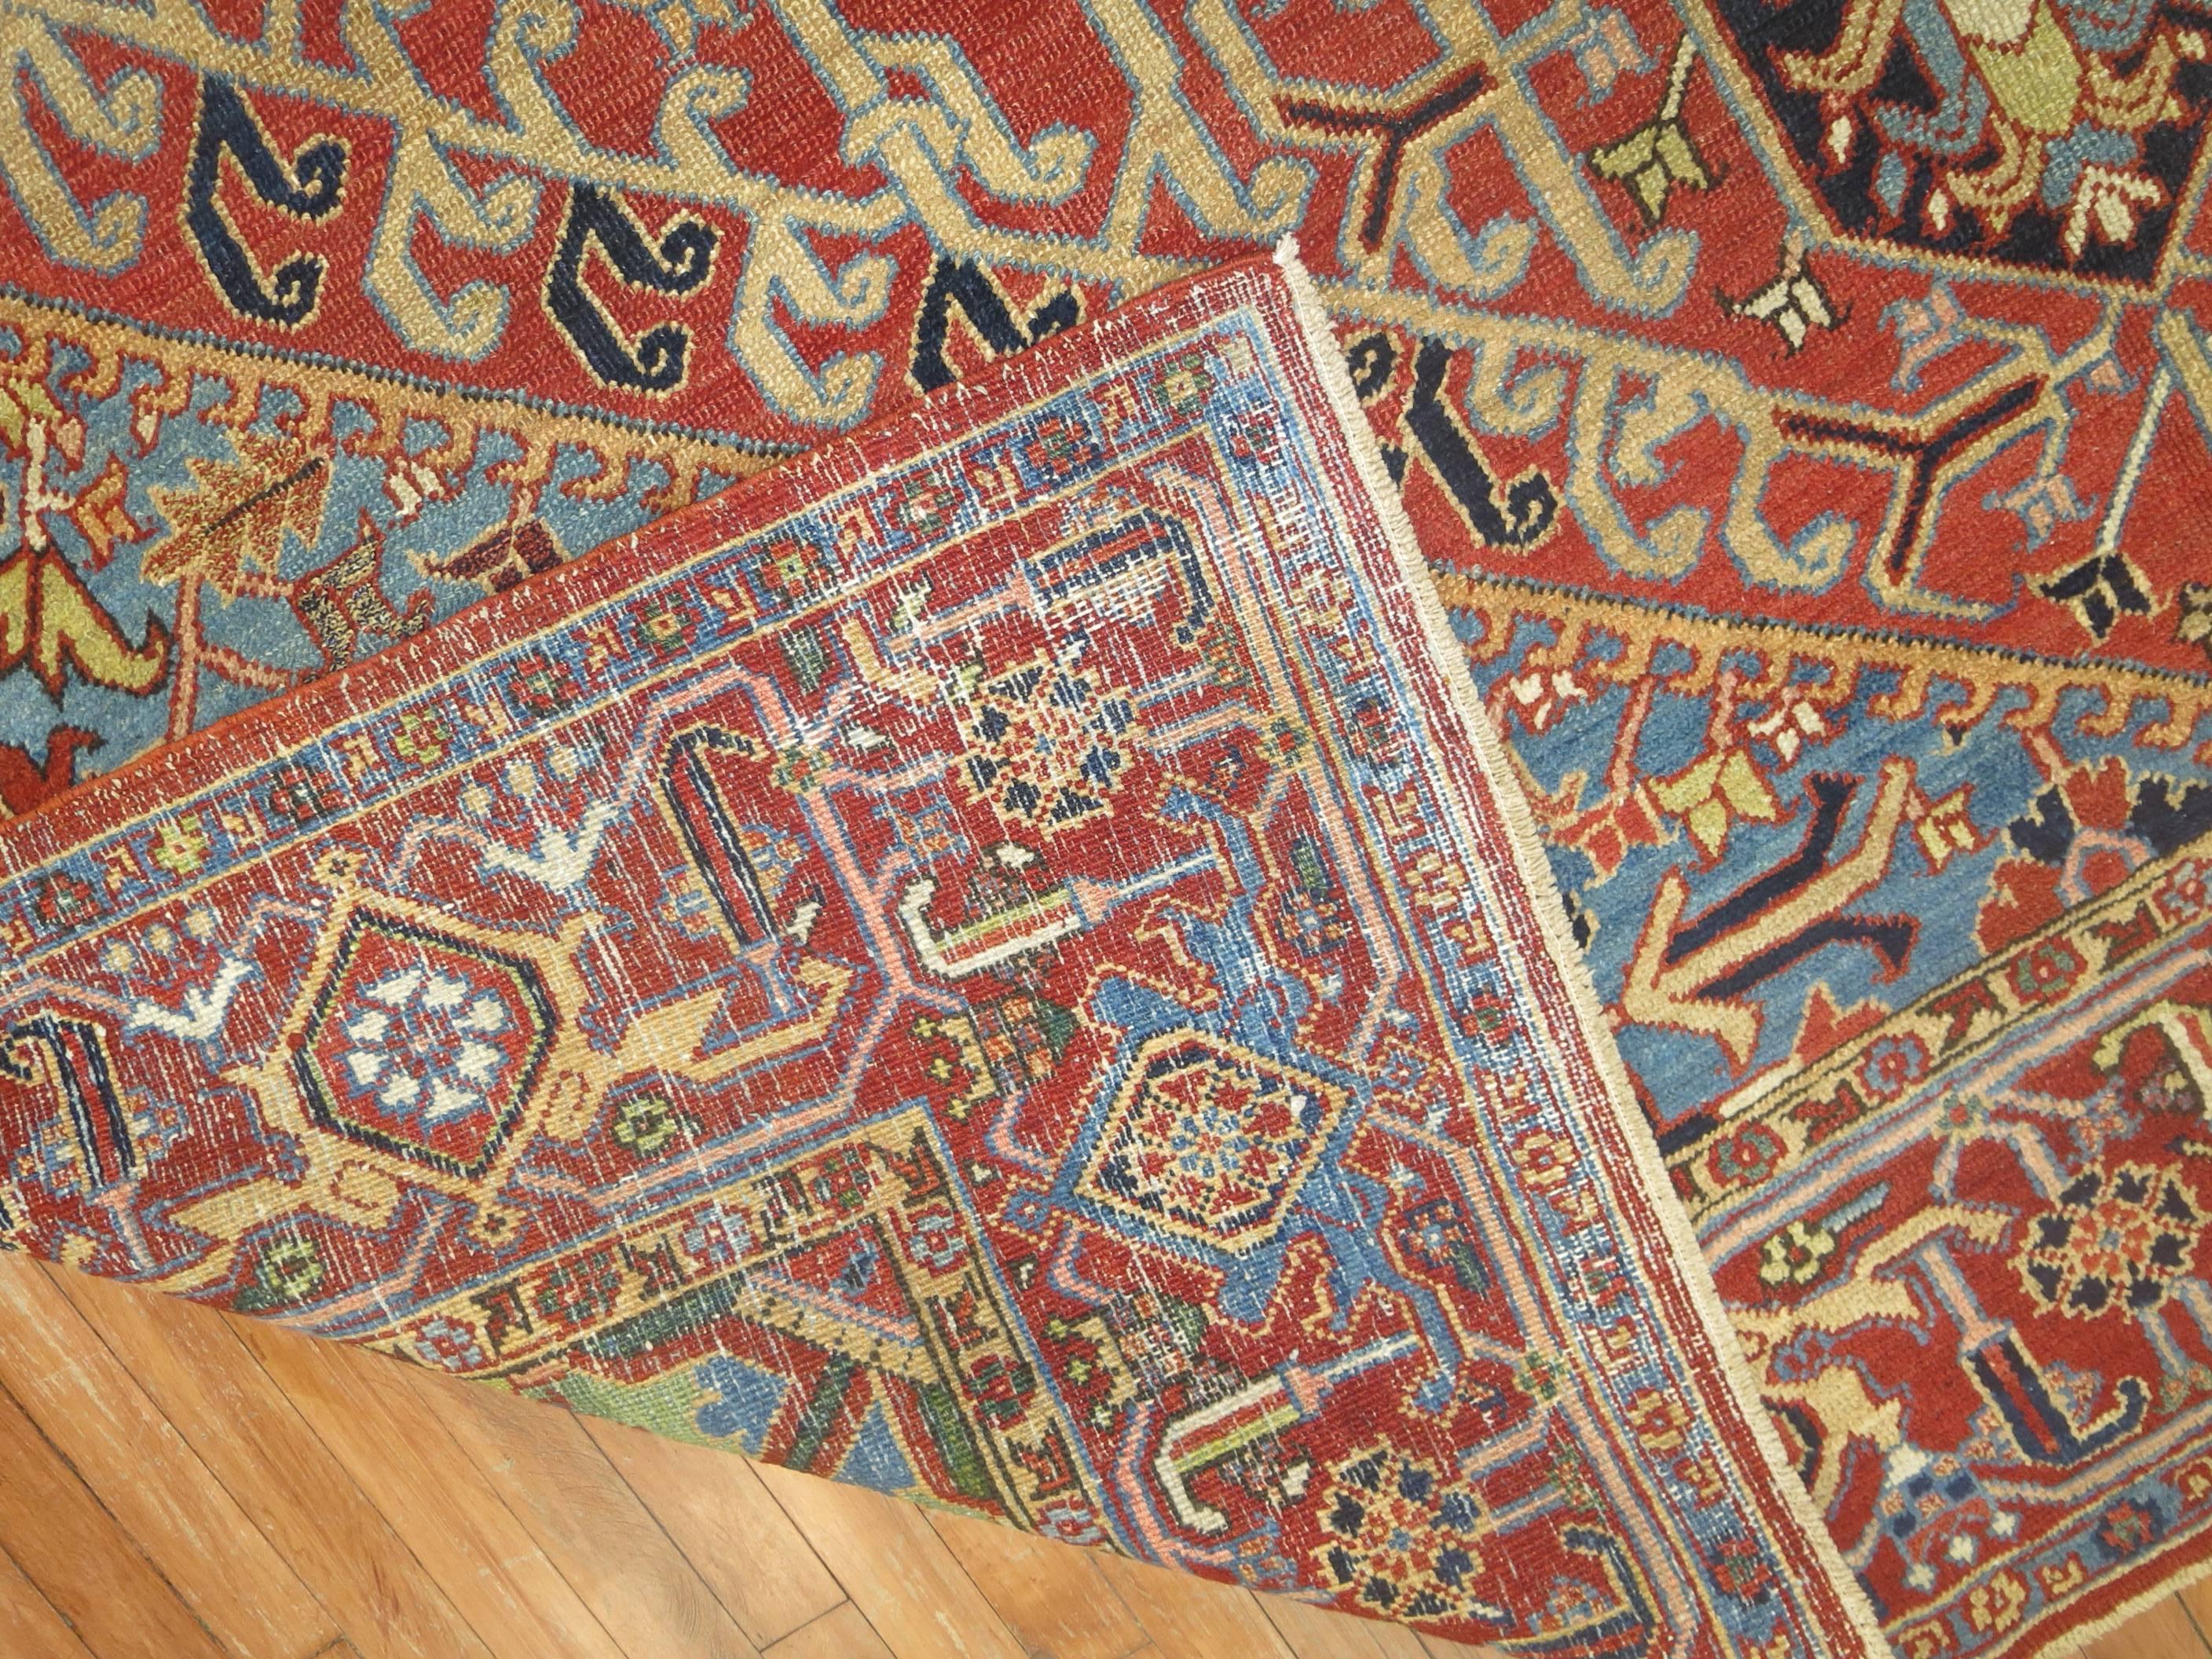 Delightful colorful early 20th century room size Persian Heriz carpet. The color combo on this is phenomenal.

Measures: 8'7'' x 11'6''.